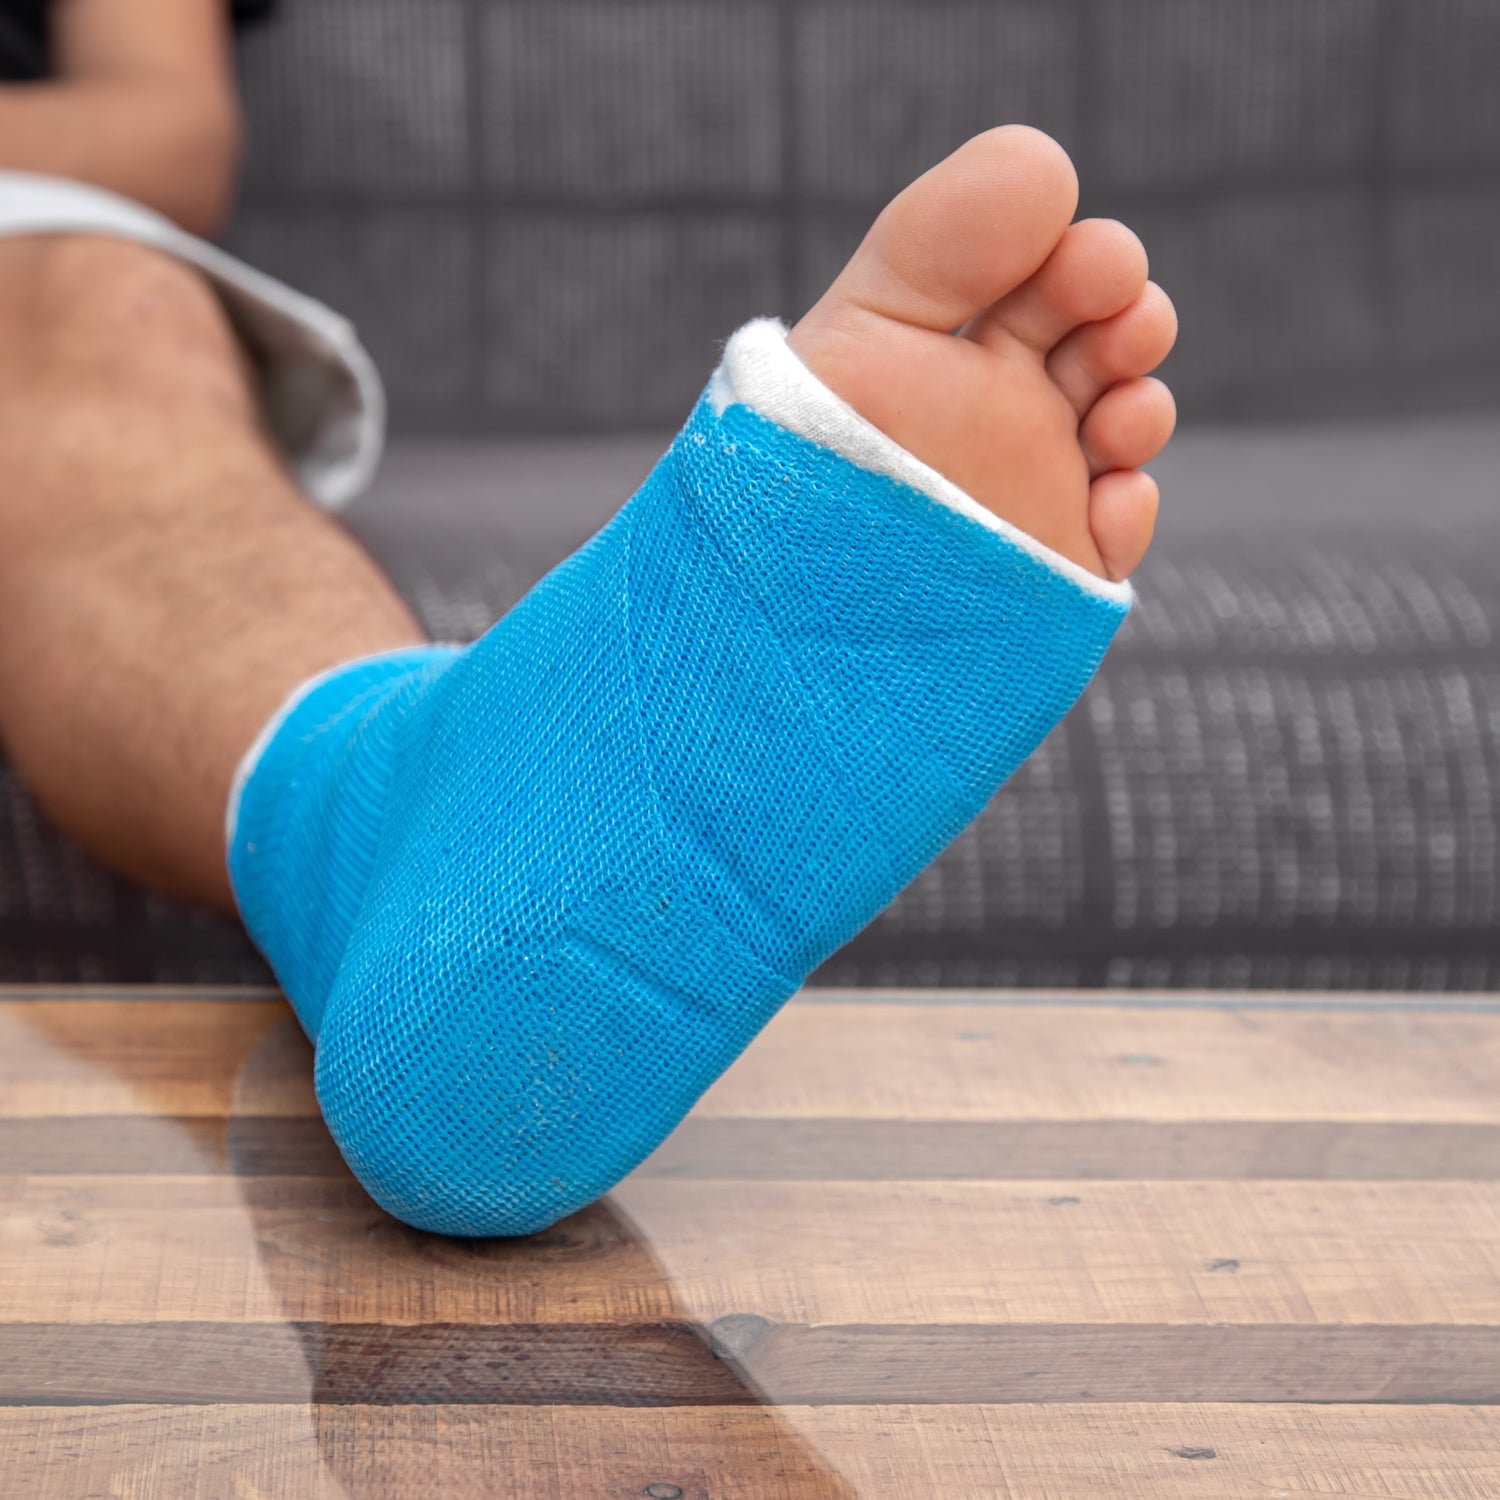 You Hurt Your Foot or Ankle: Tips for a Better Recovery - Bearfoot